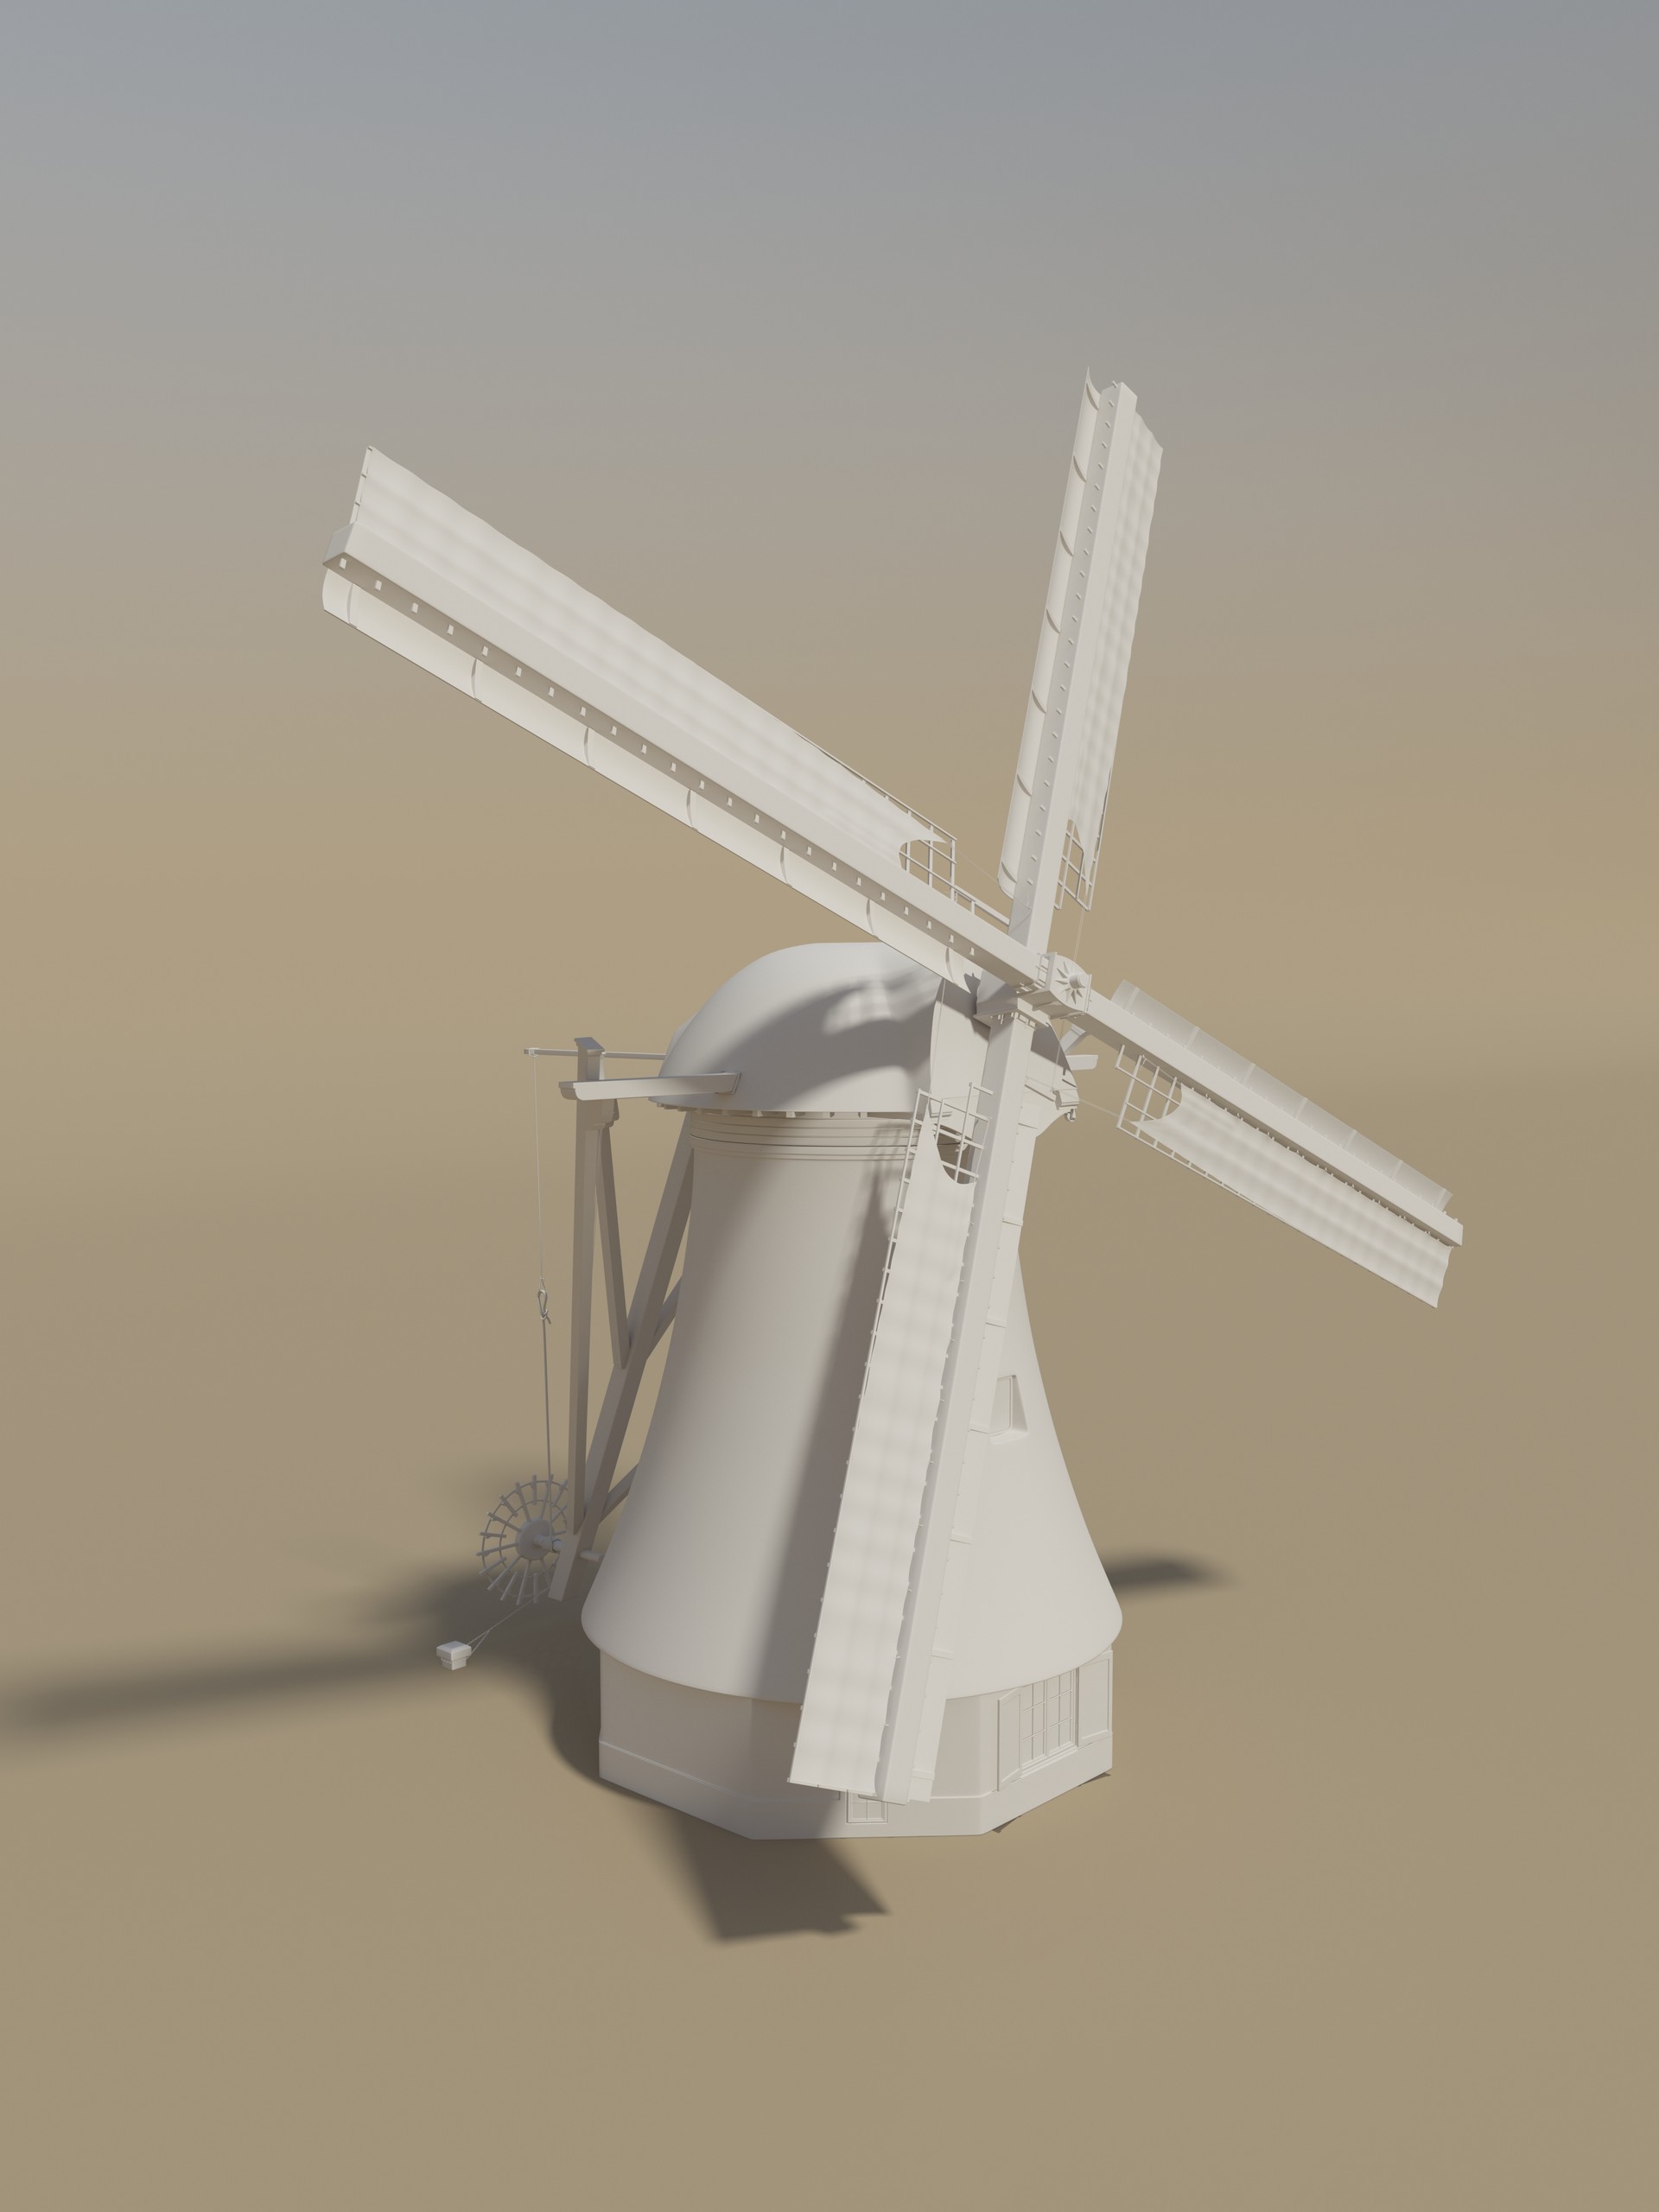 who created the windmill